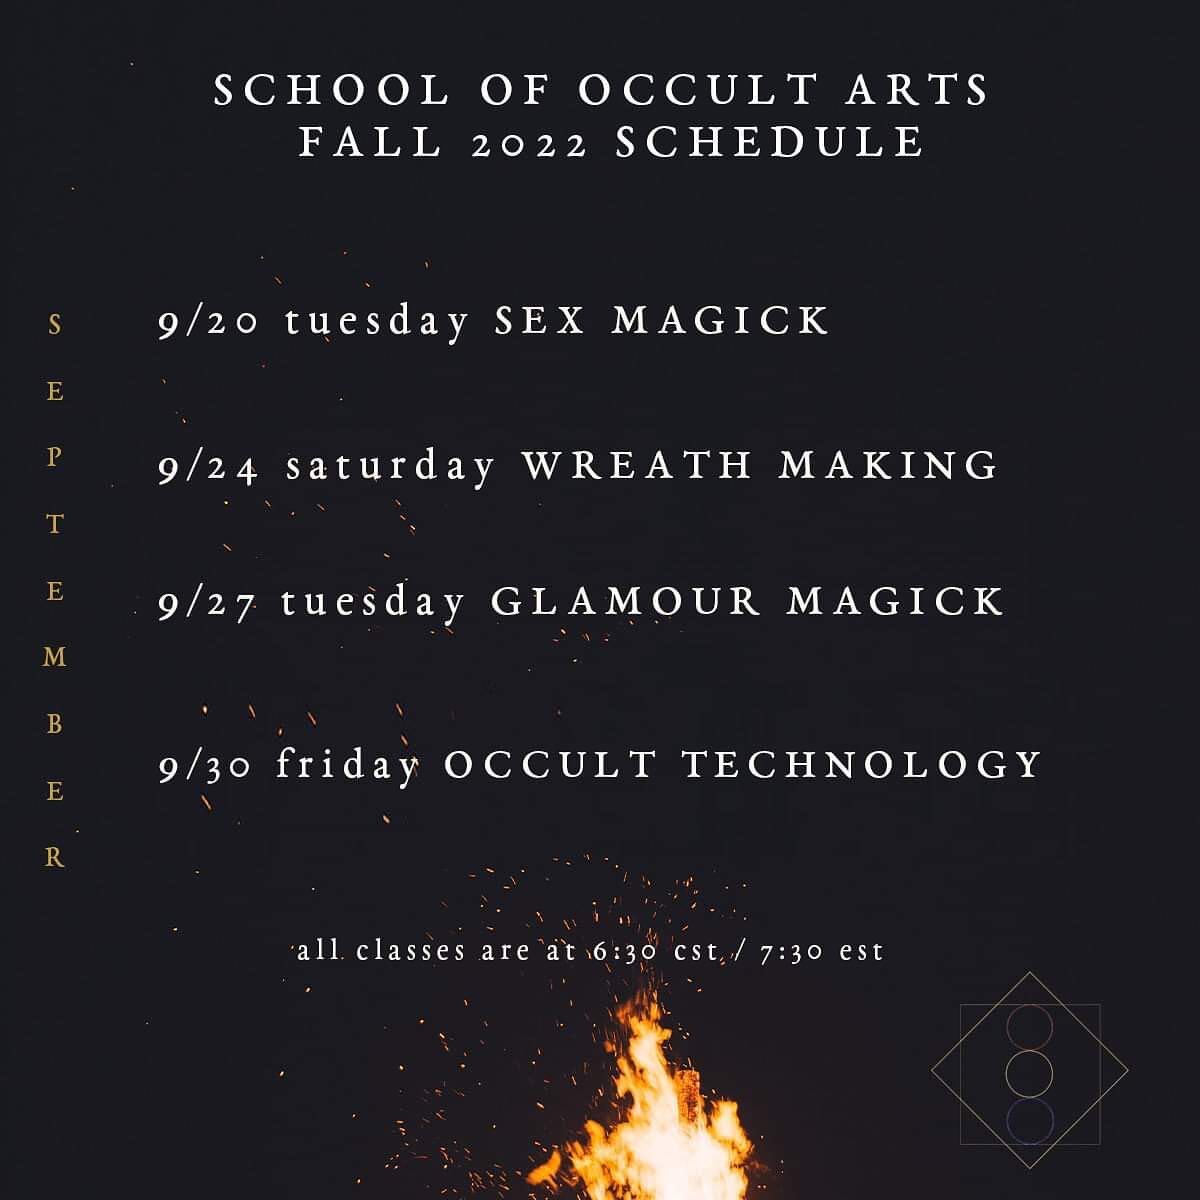 The Fall Semester has Begun!

Join @the.eckharts and I at @schoolofoccultarts as we engage in lectures and hands on workshops exploring a variety of occult topics!

This fall we are also kicking off the semester with @manlyphall.wisdom The Secret Tea